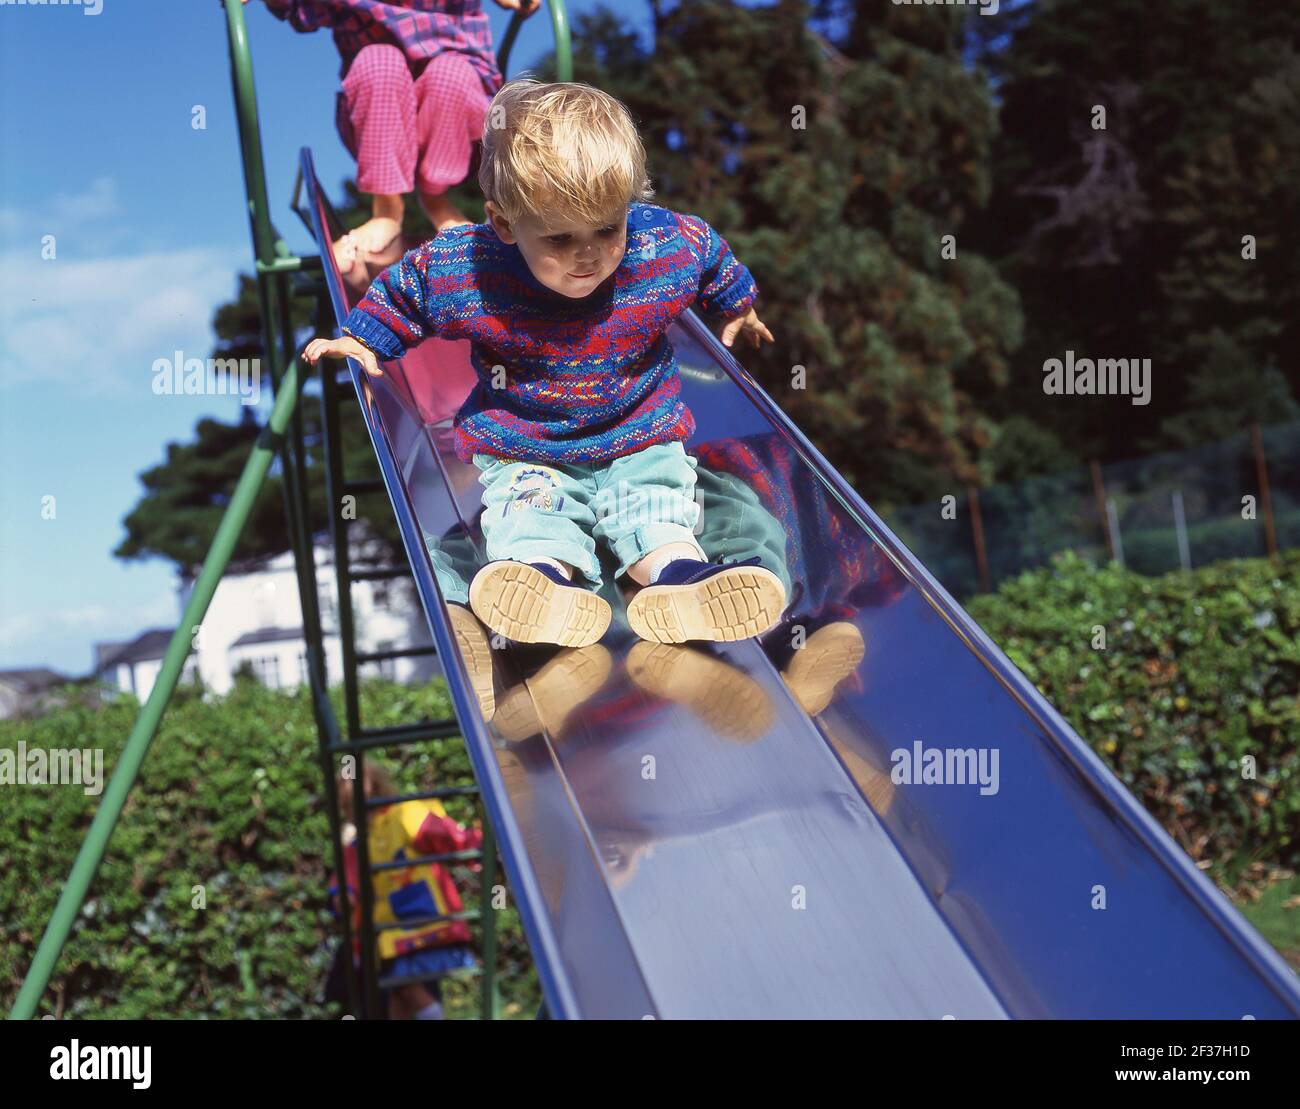 Young boy on slide in playground, Berkshire, England, United Kingdom Stock Photo